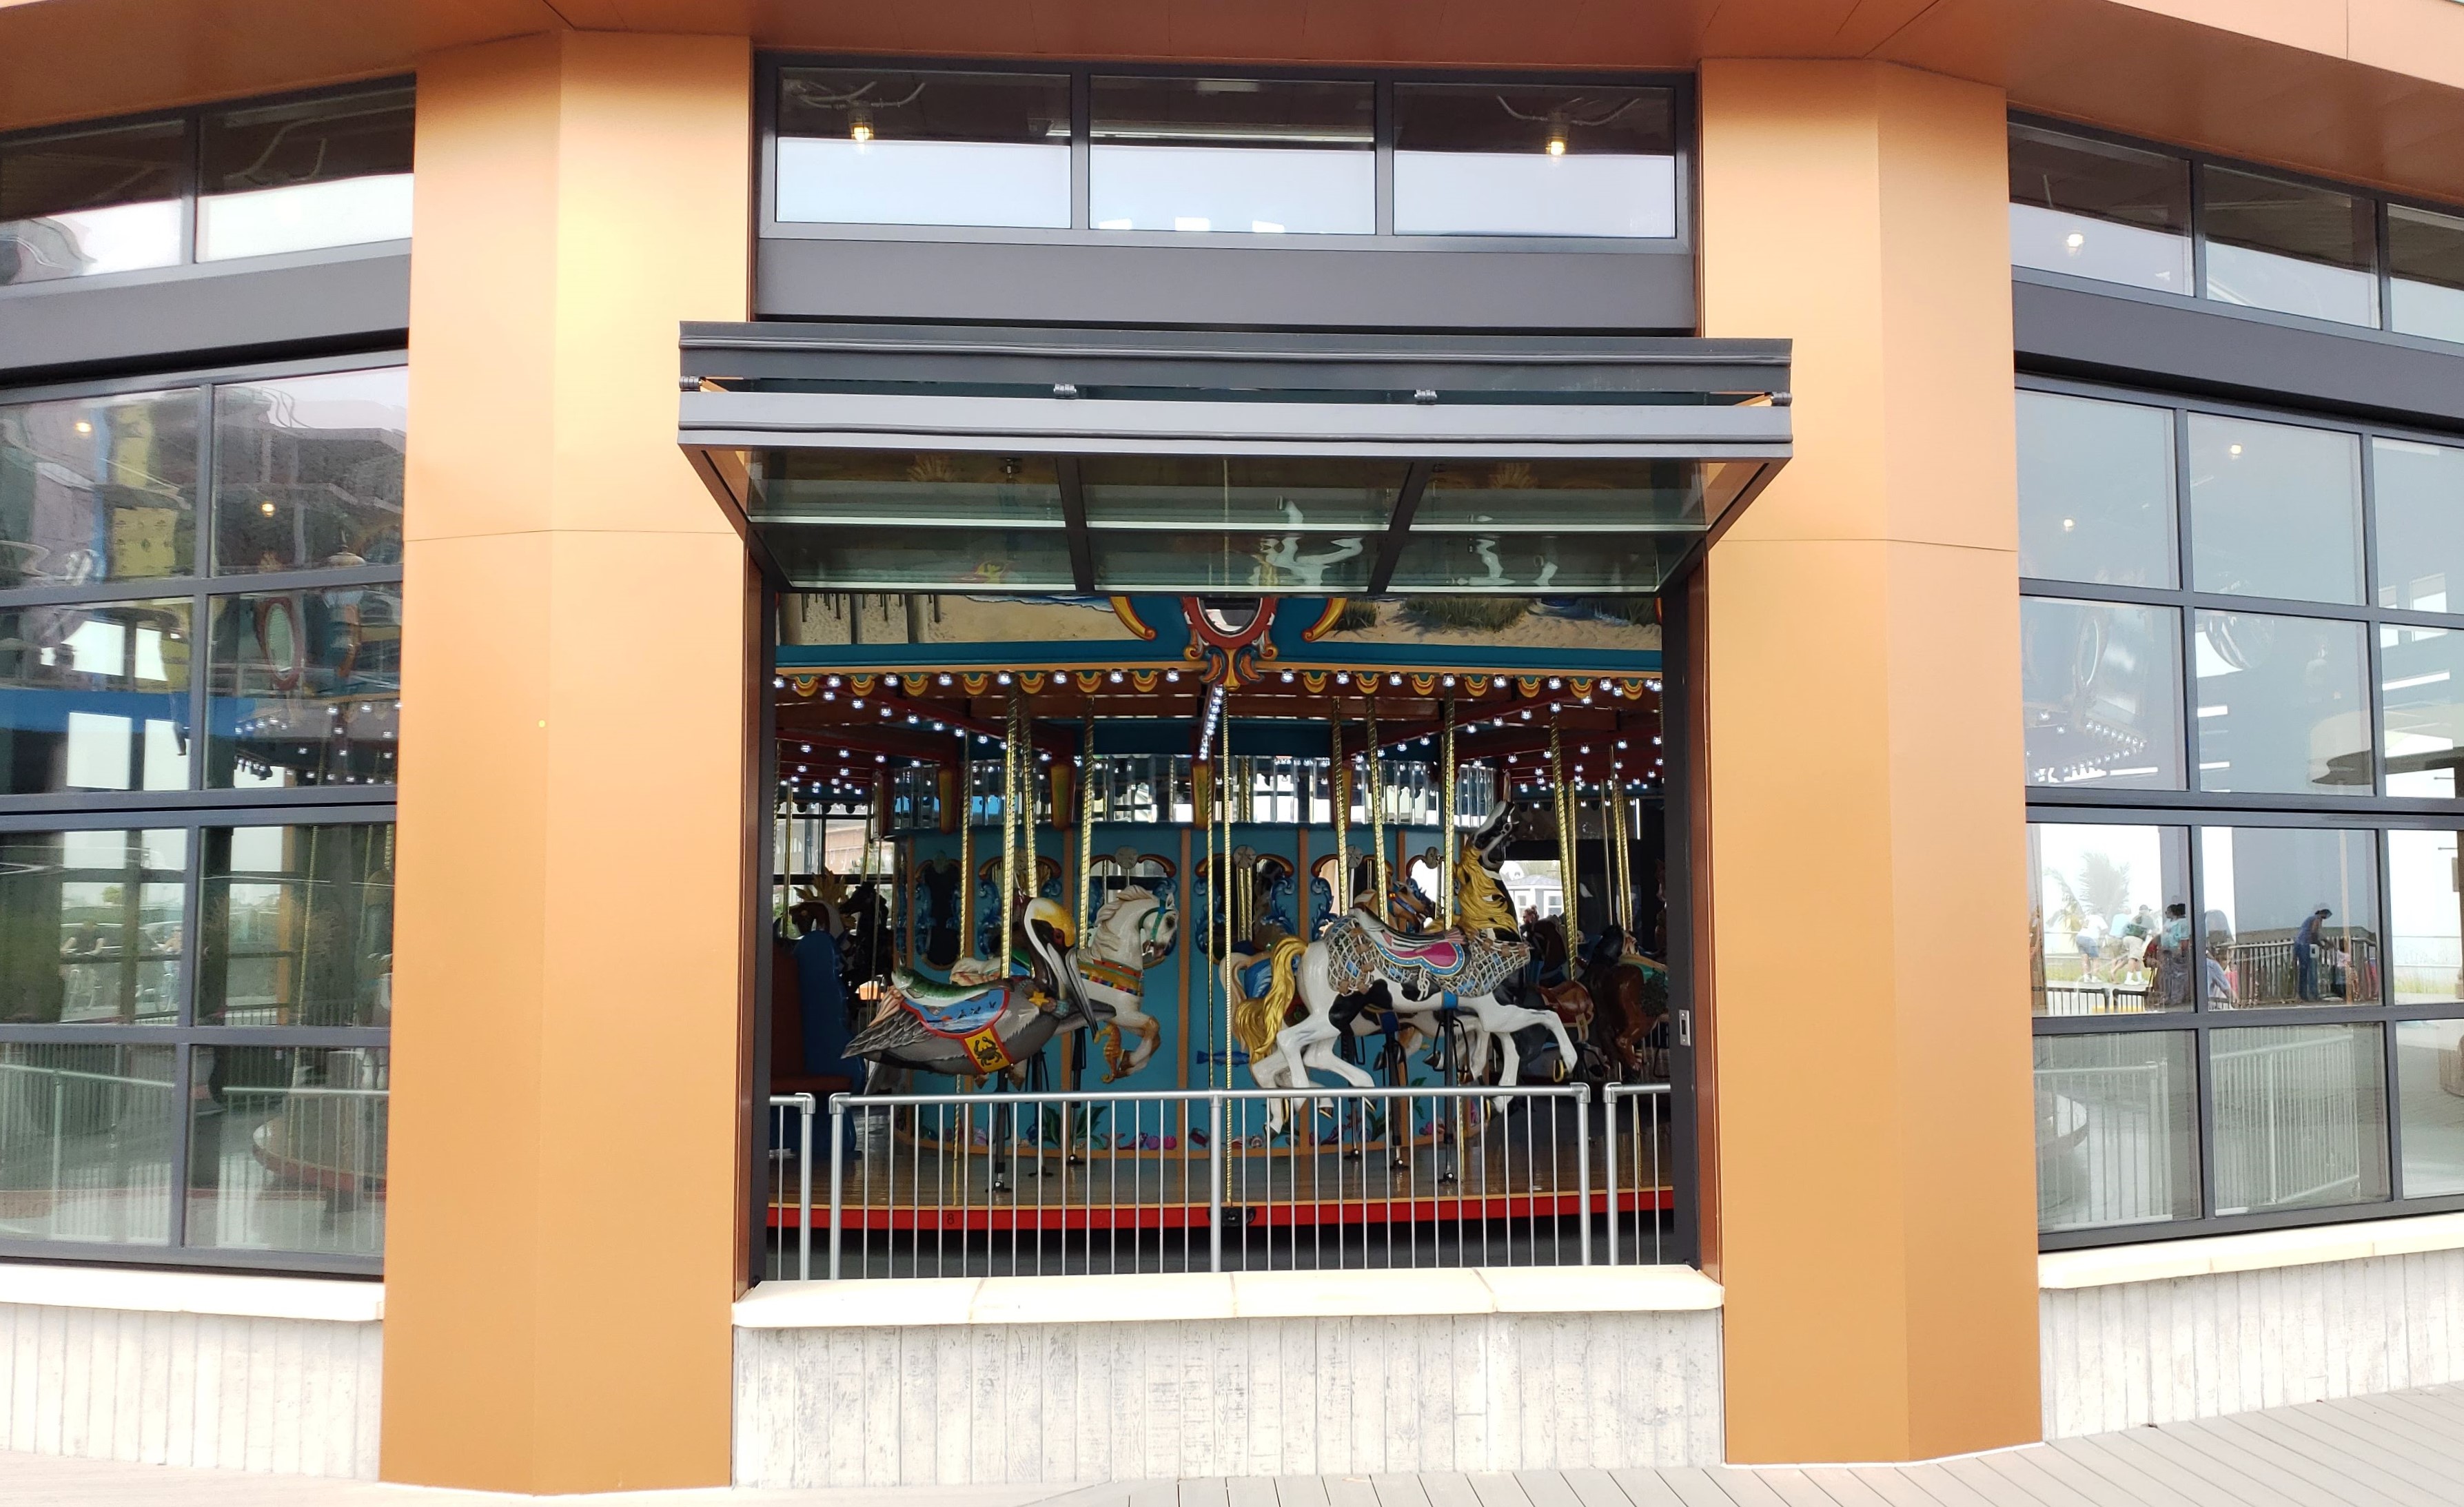 Pier Village - Renlita's NuFold Turns Carousel Into Year-Round Attraction  at the Jersey Shore